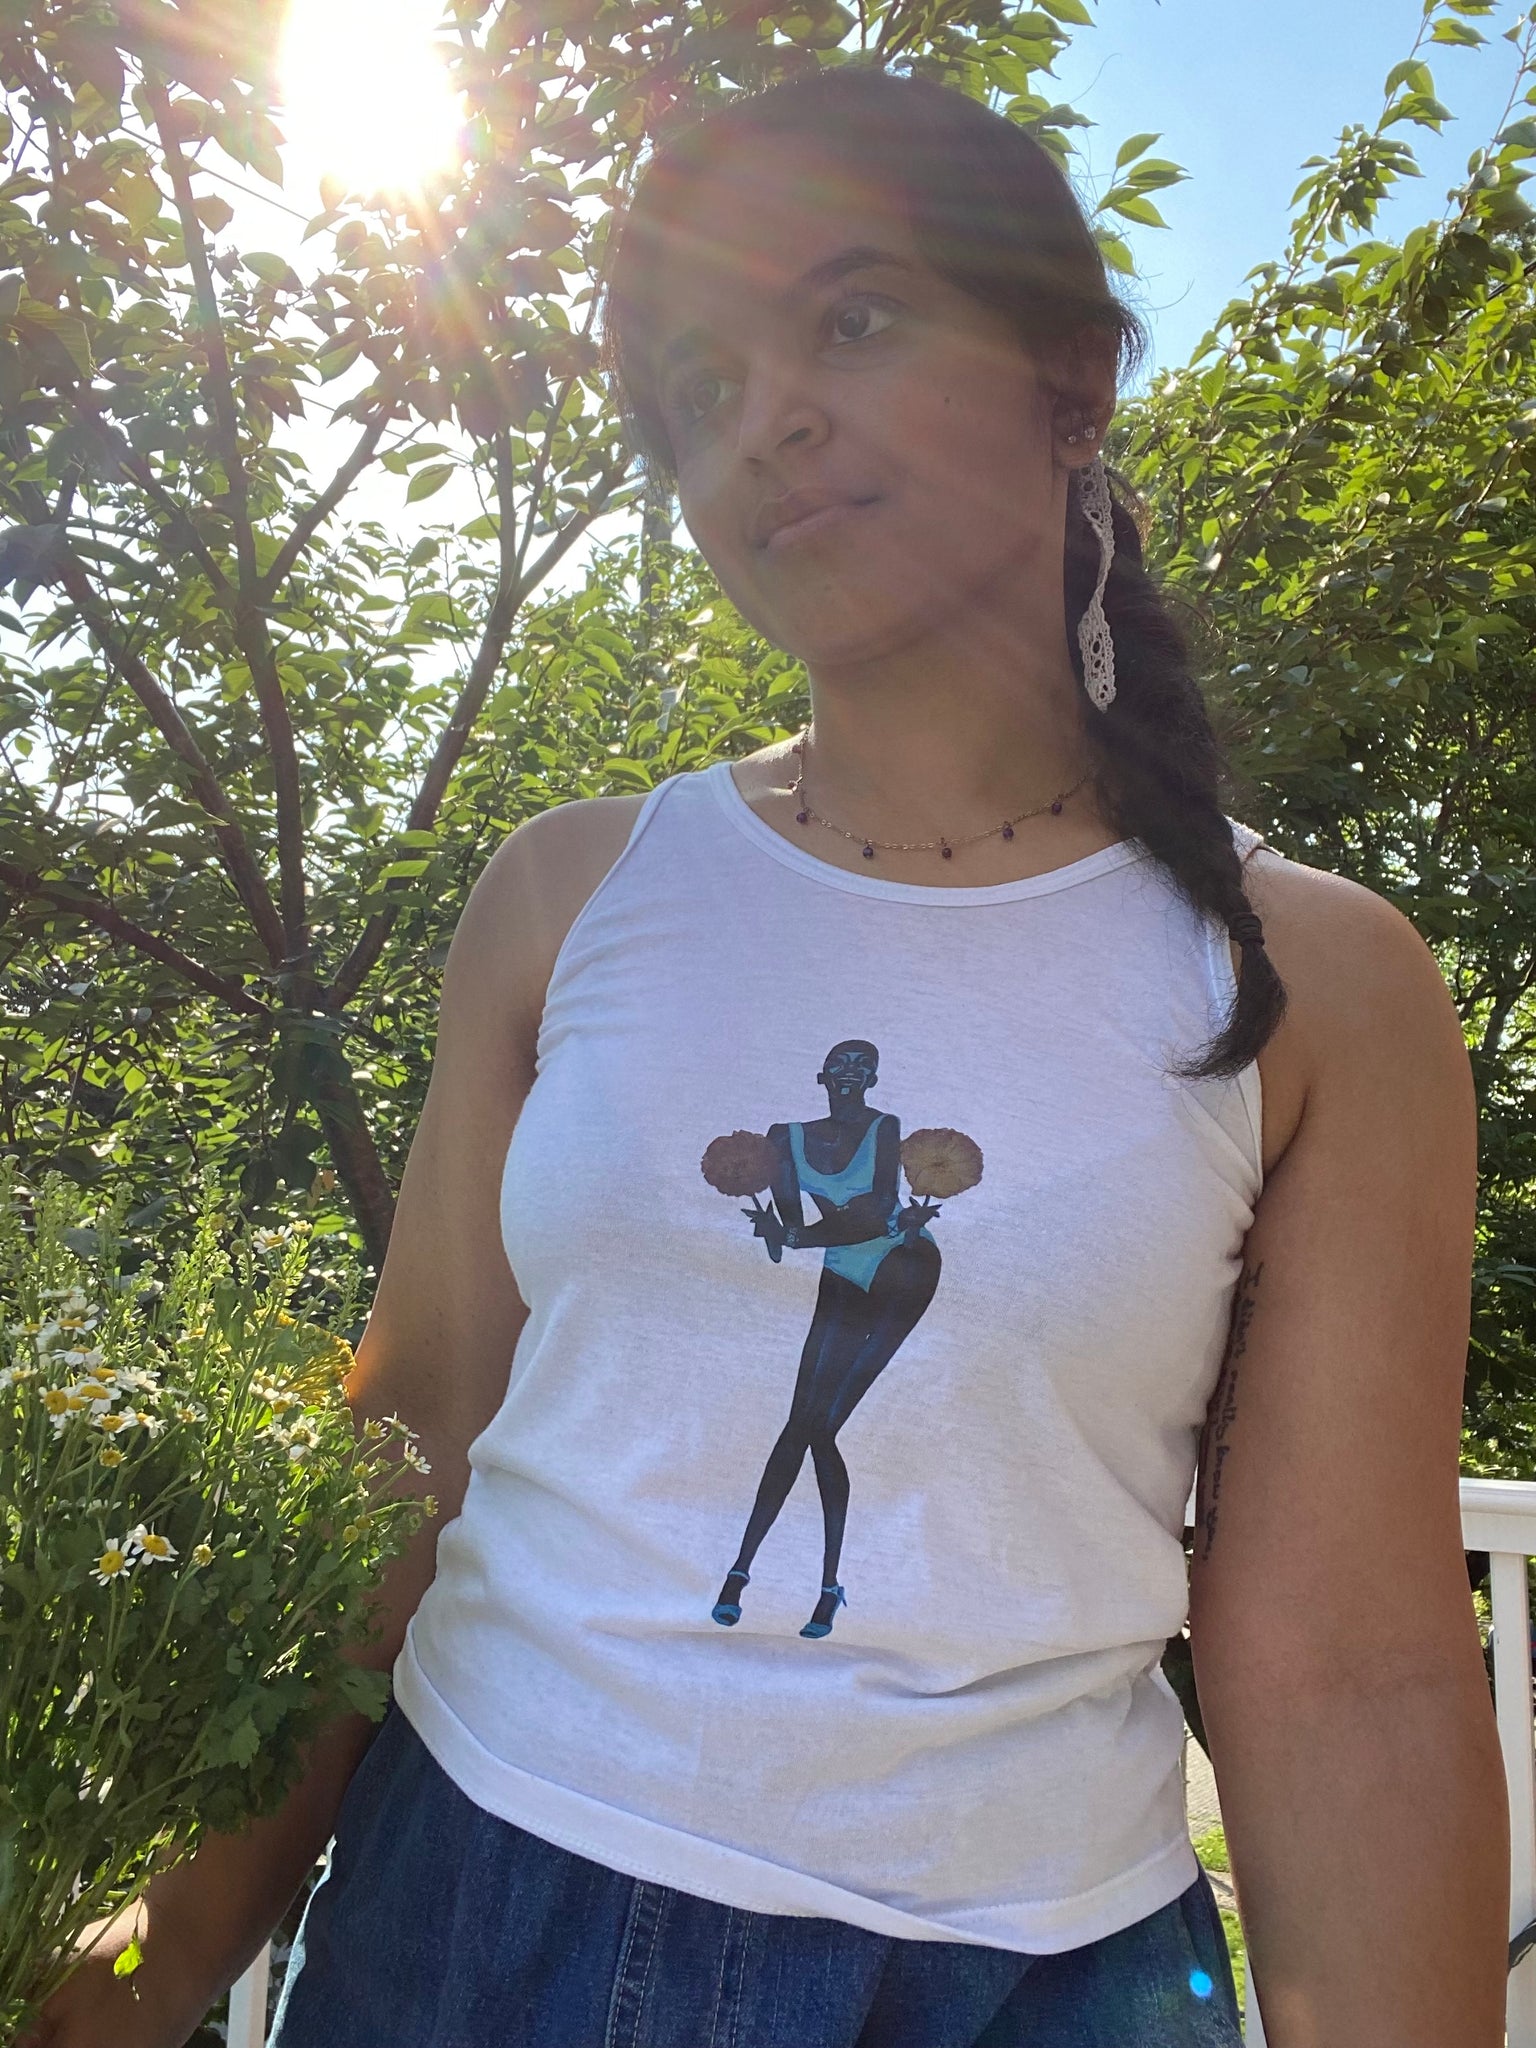 A girl holding flowers and posing in a white upcycled tank top with an image on it of supermodel Adut Akech